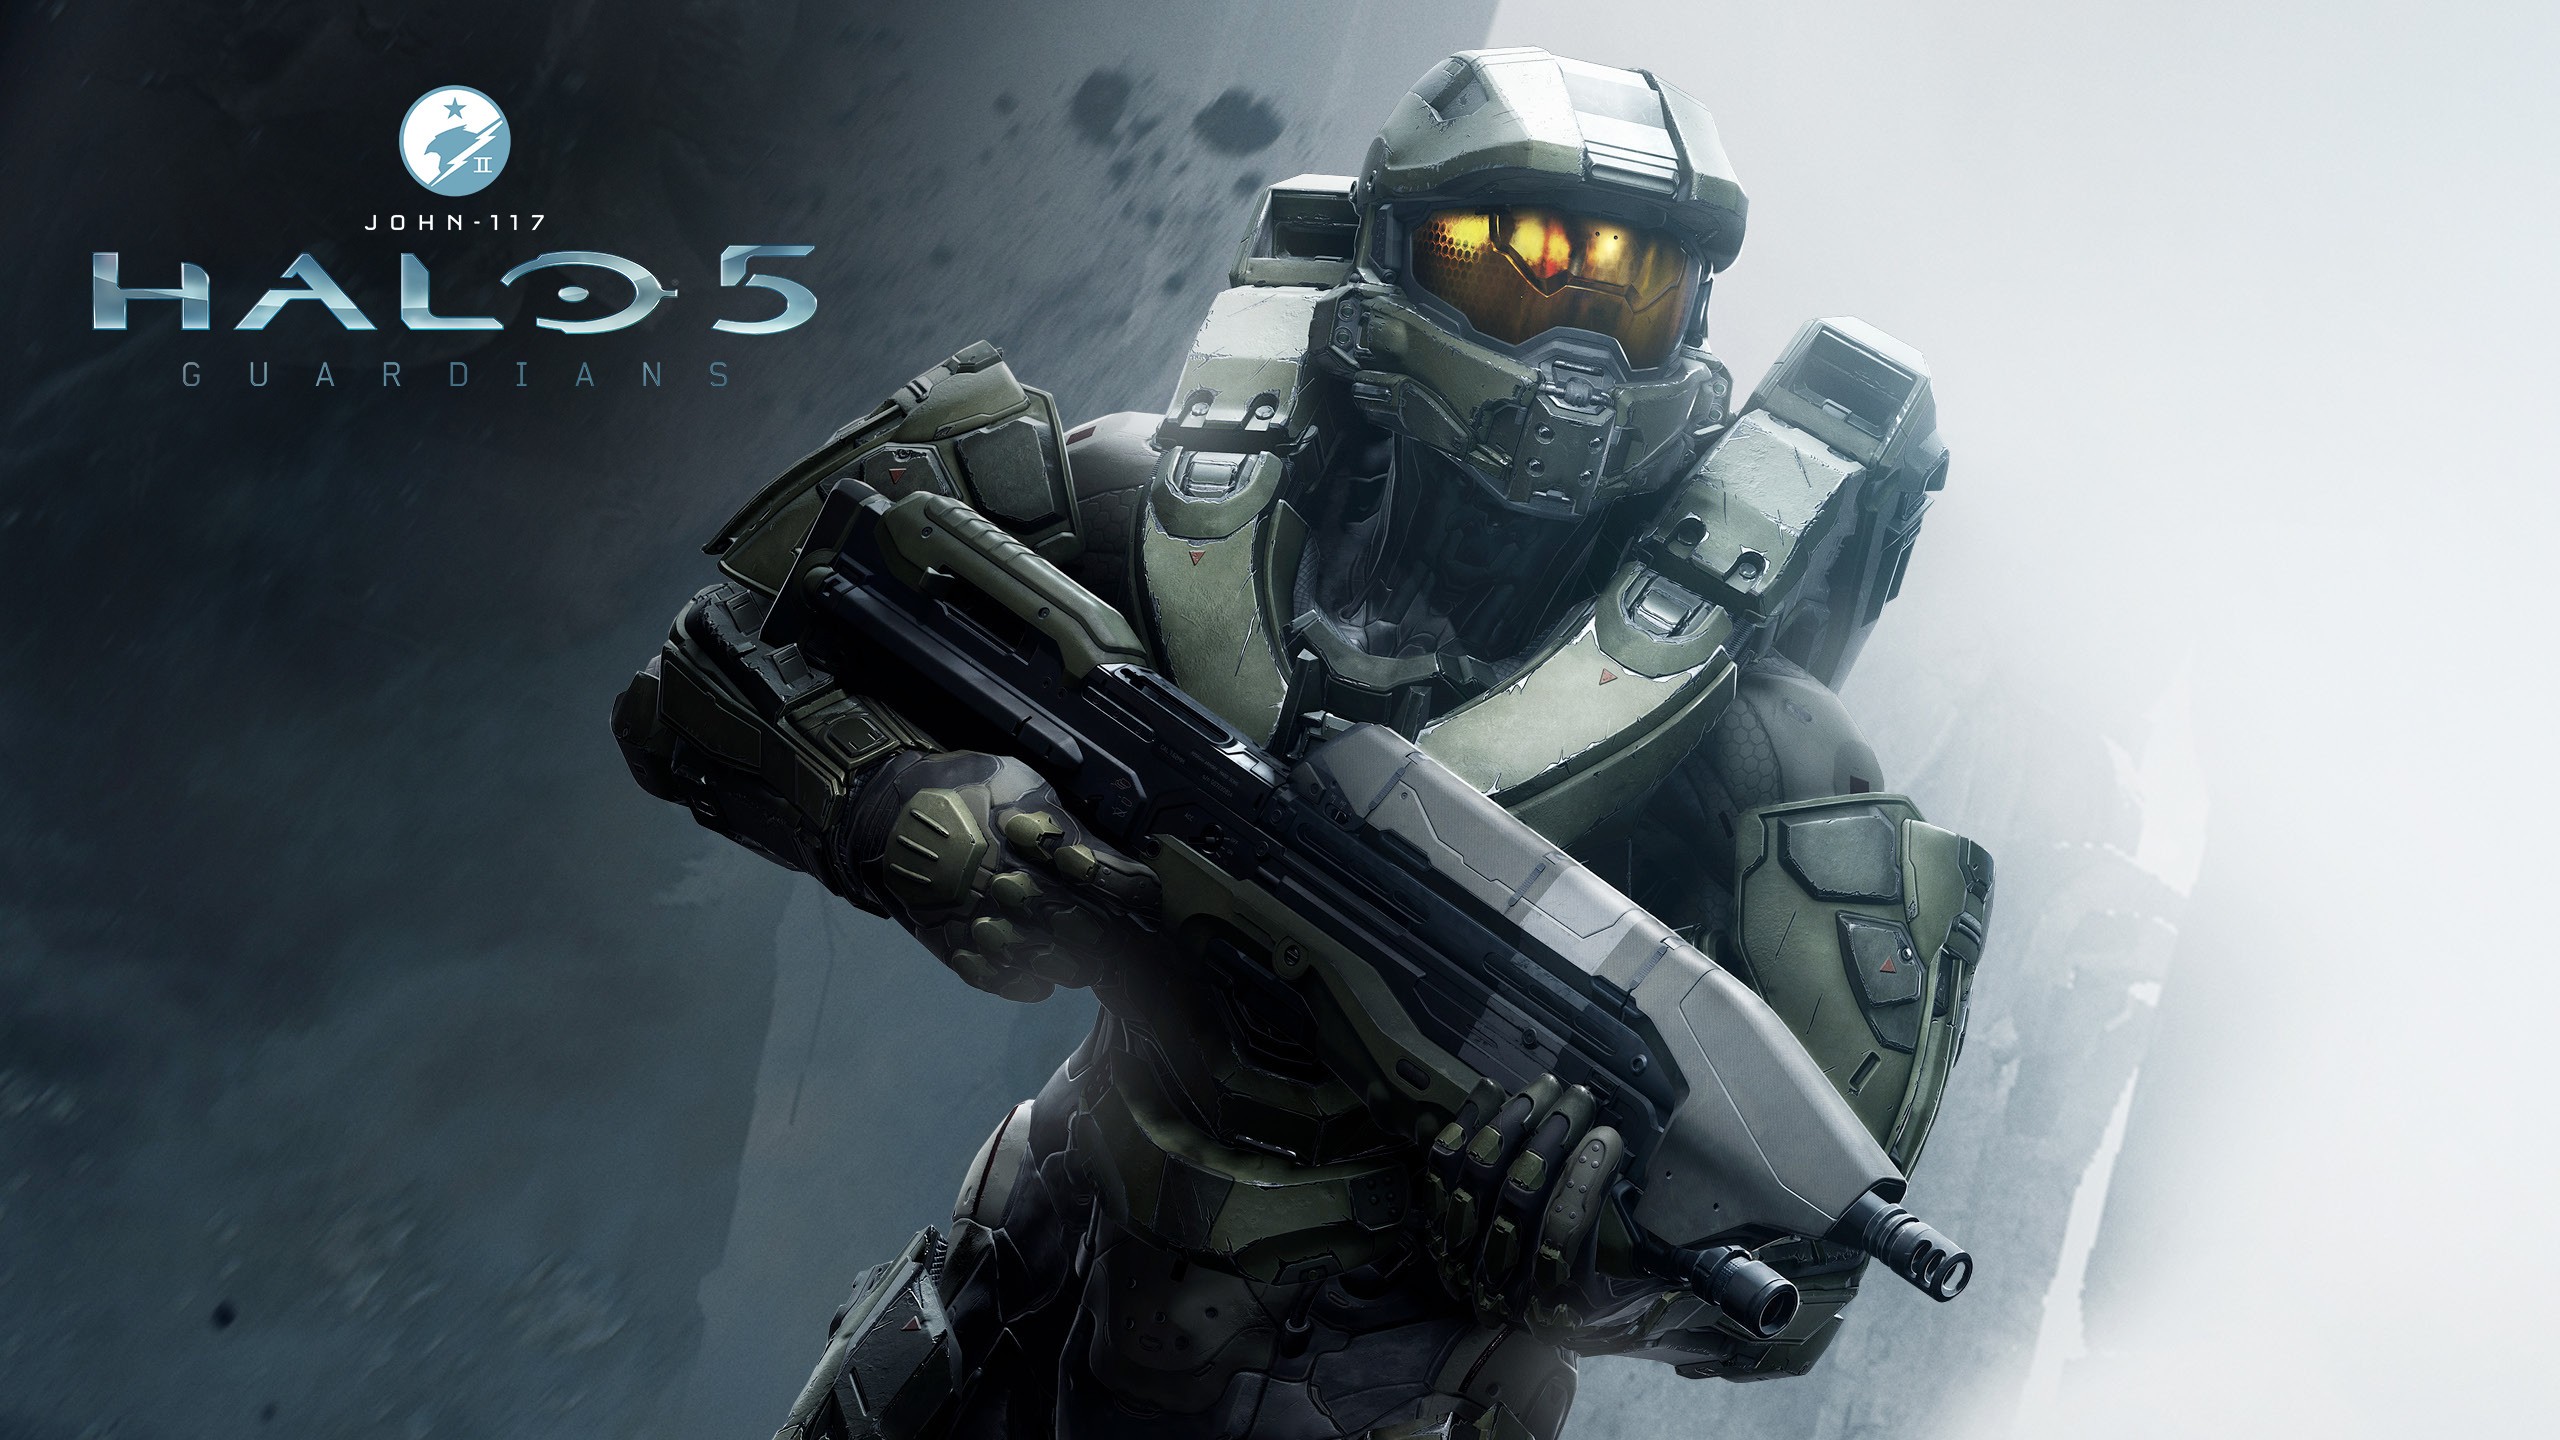 General 2560x1440 Halo 5: Guardians video games science fiction Futuristic Weapons Master Chief (Halo) video game art armor video game characters